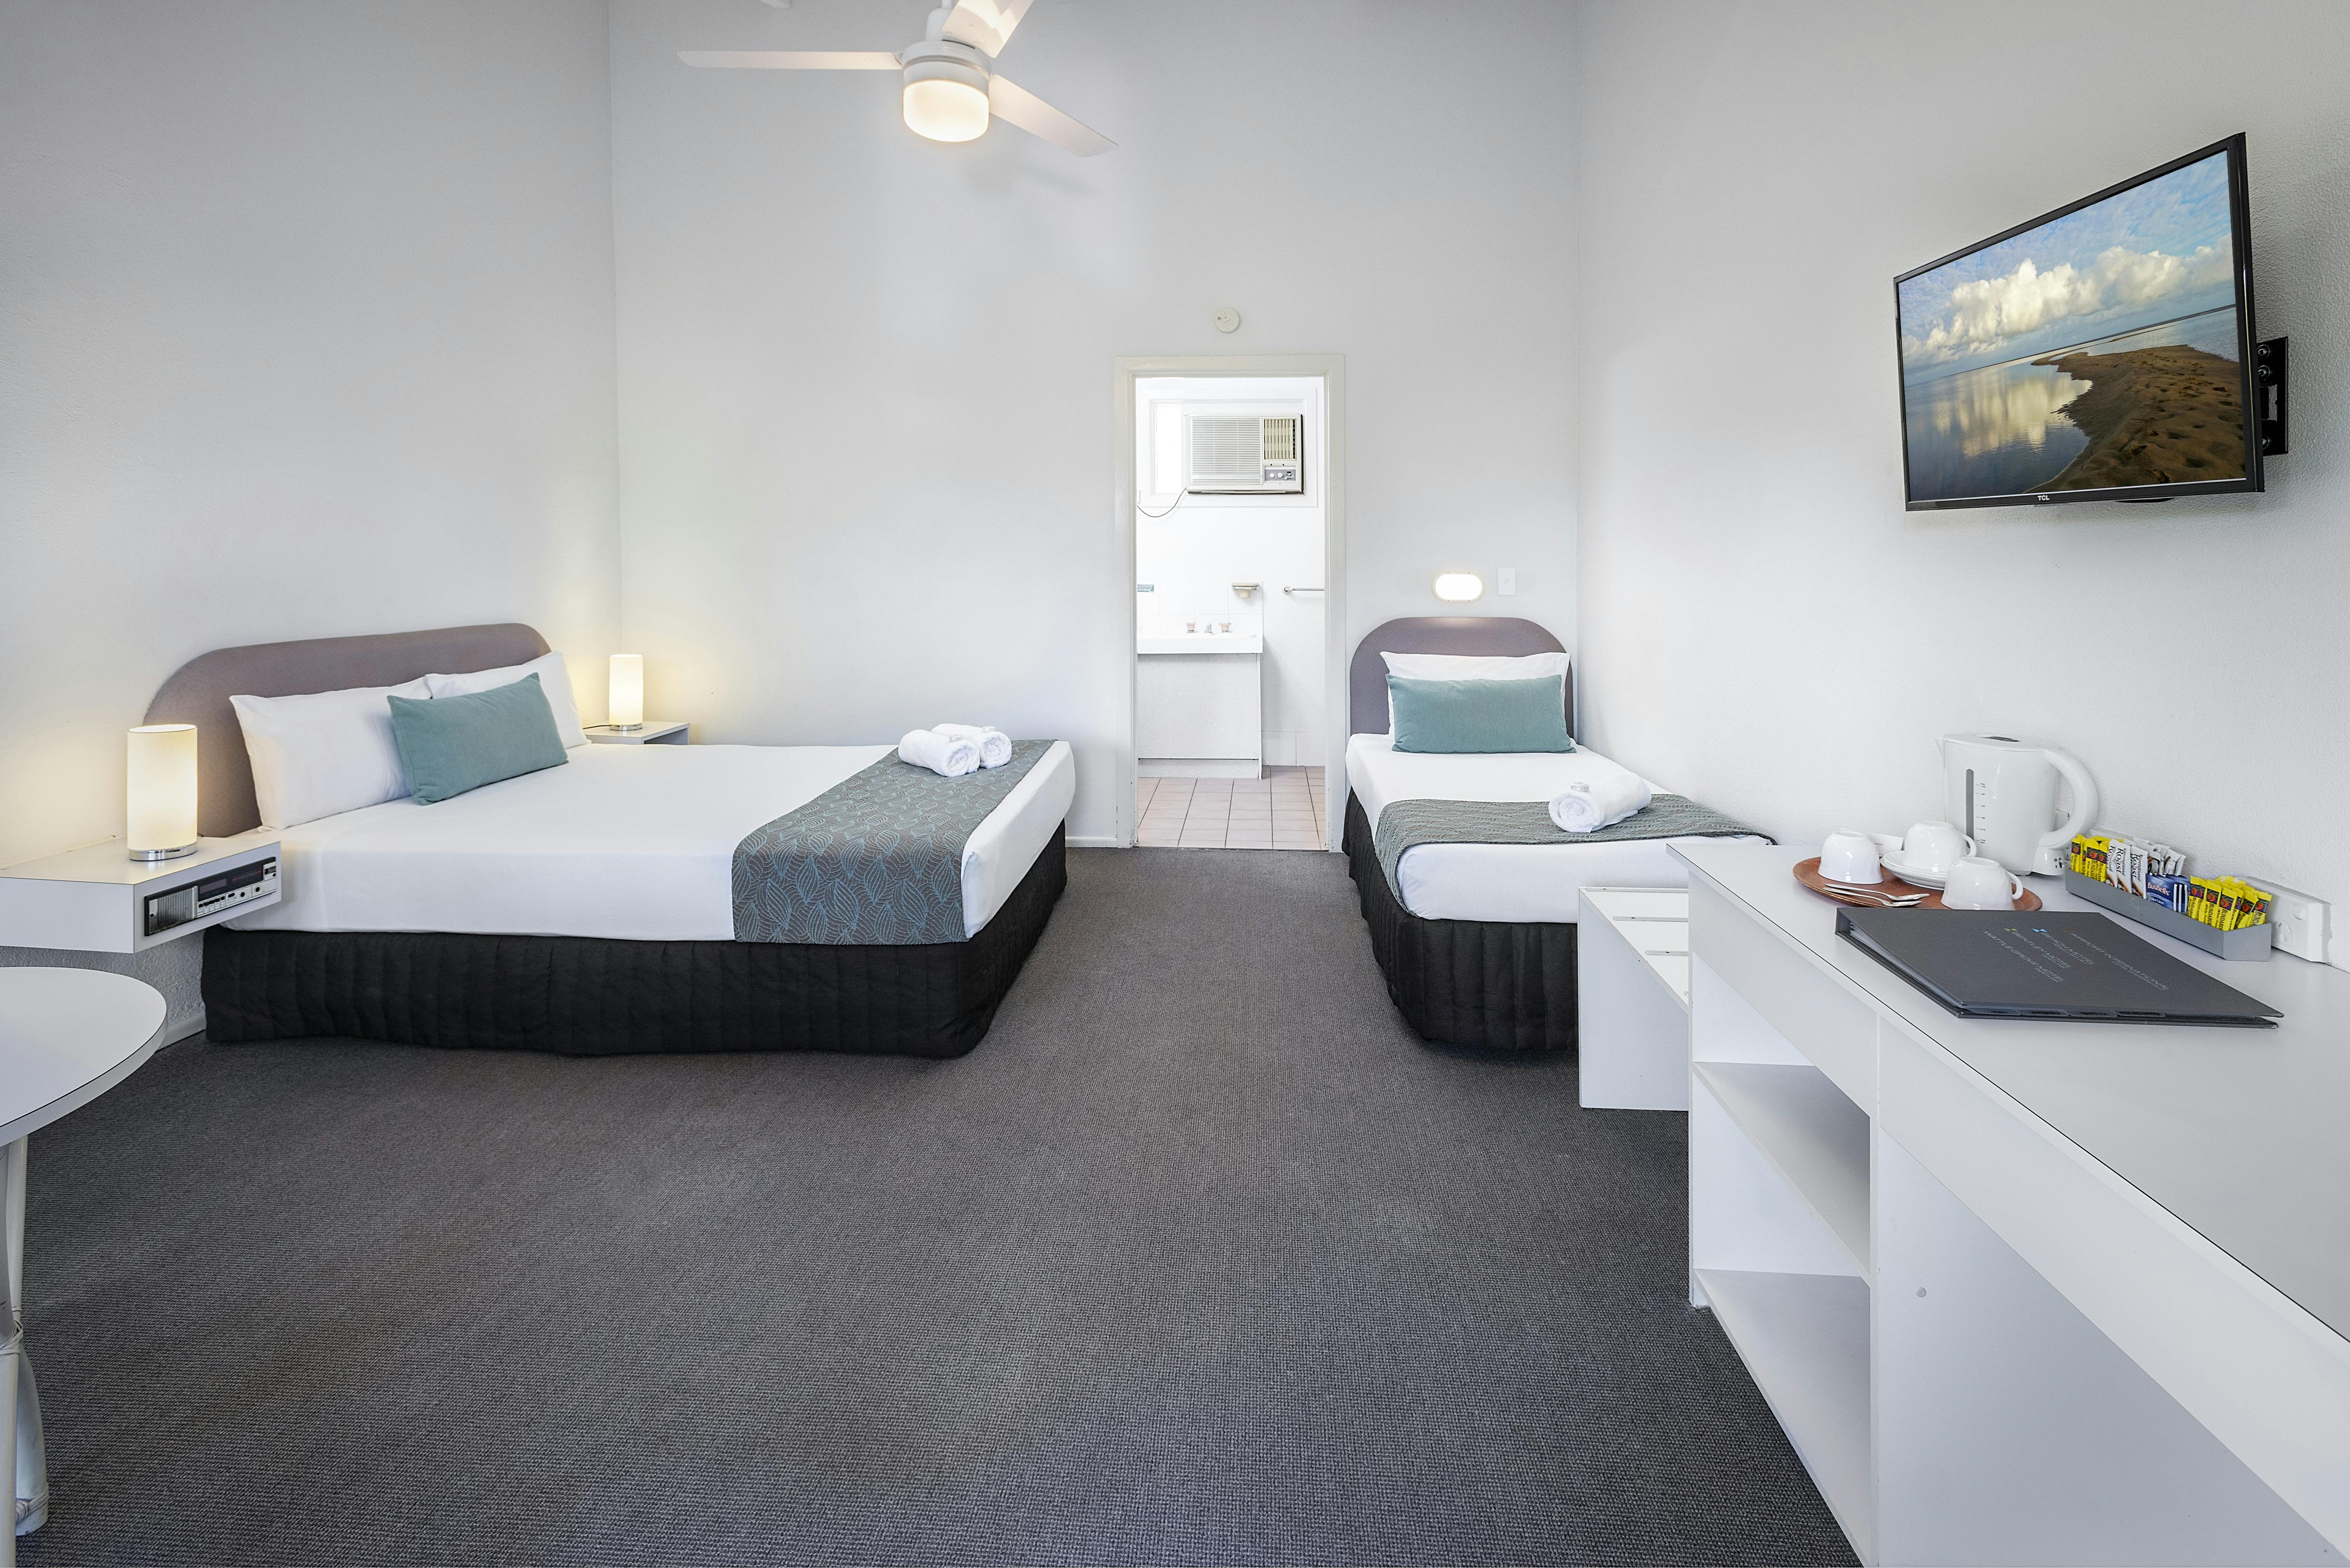 The Beach Motel provides budget accommodation for those looking for a short stay in Hervey Bay.